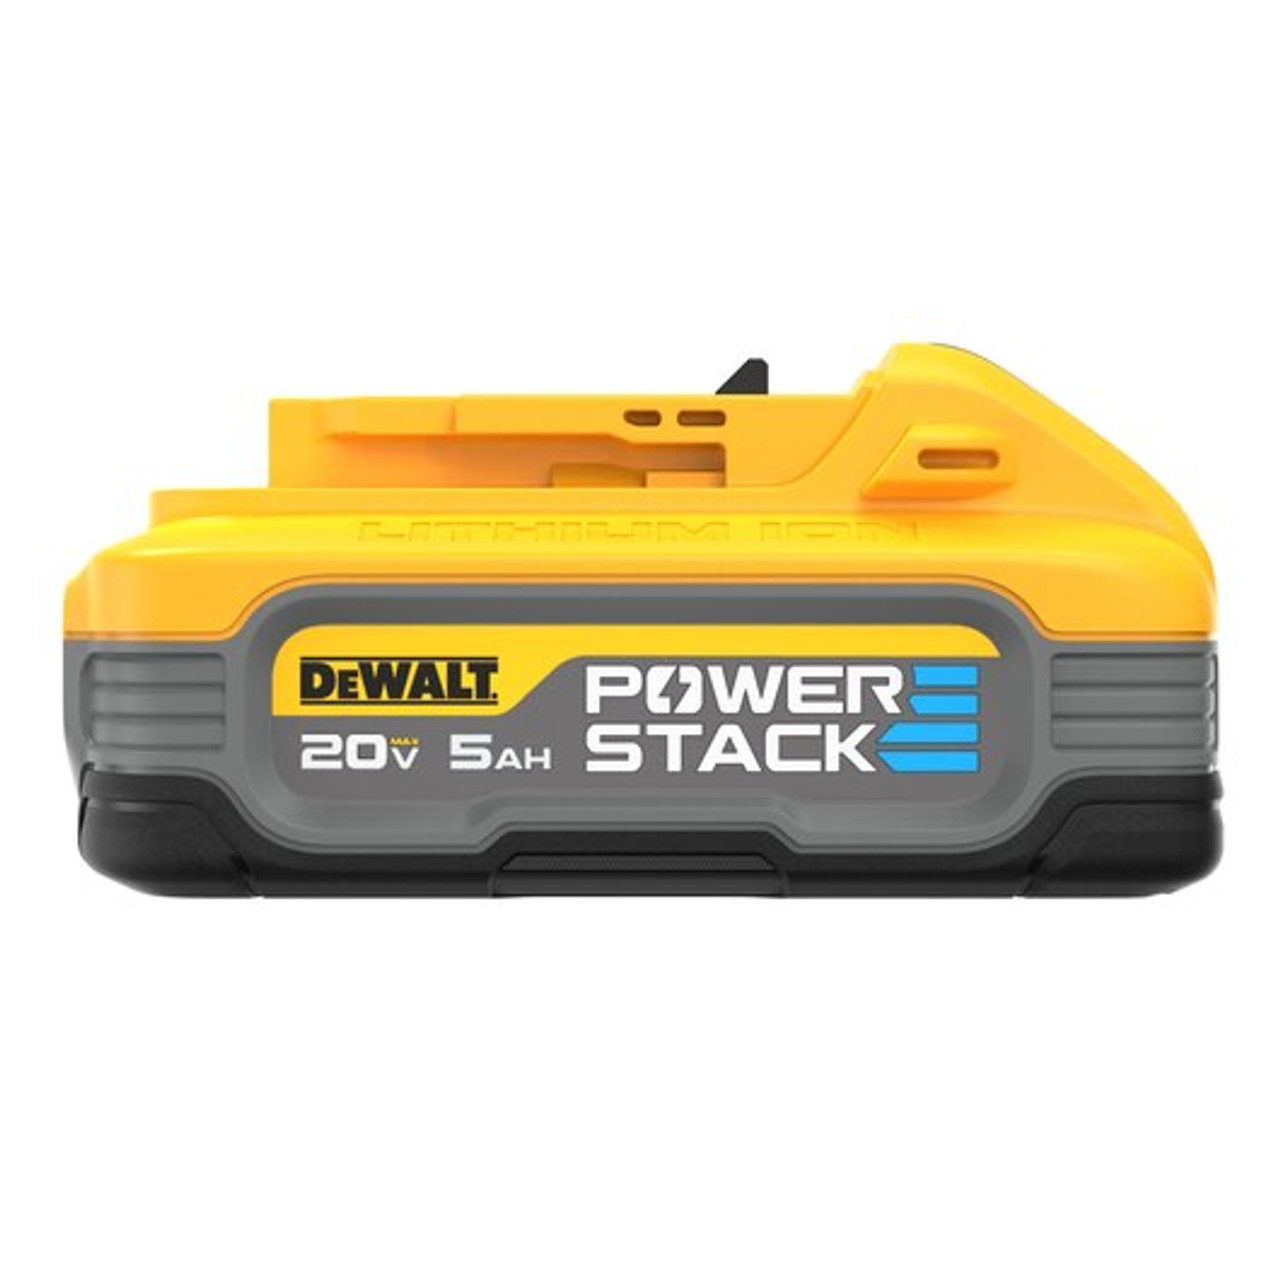 DCBP520 20V MAX POWERSTAK COMPACT 5A BATTERY